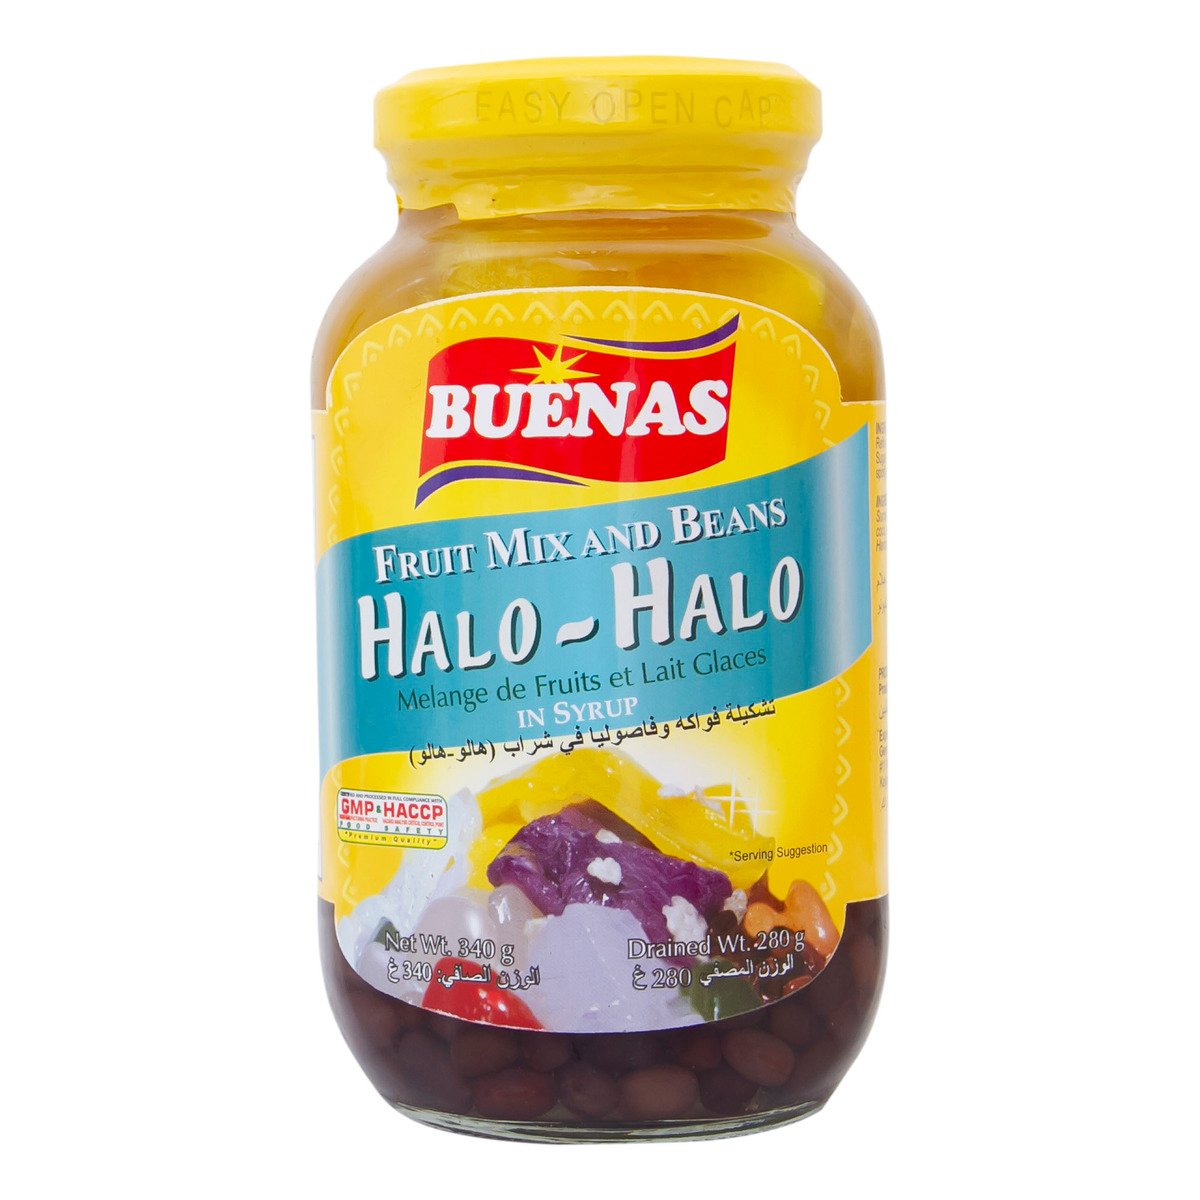 Buenas Halo Halo Fruit Mix And Beans In Syrup 340 g